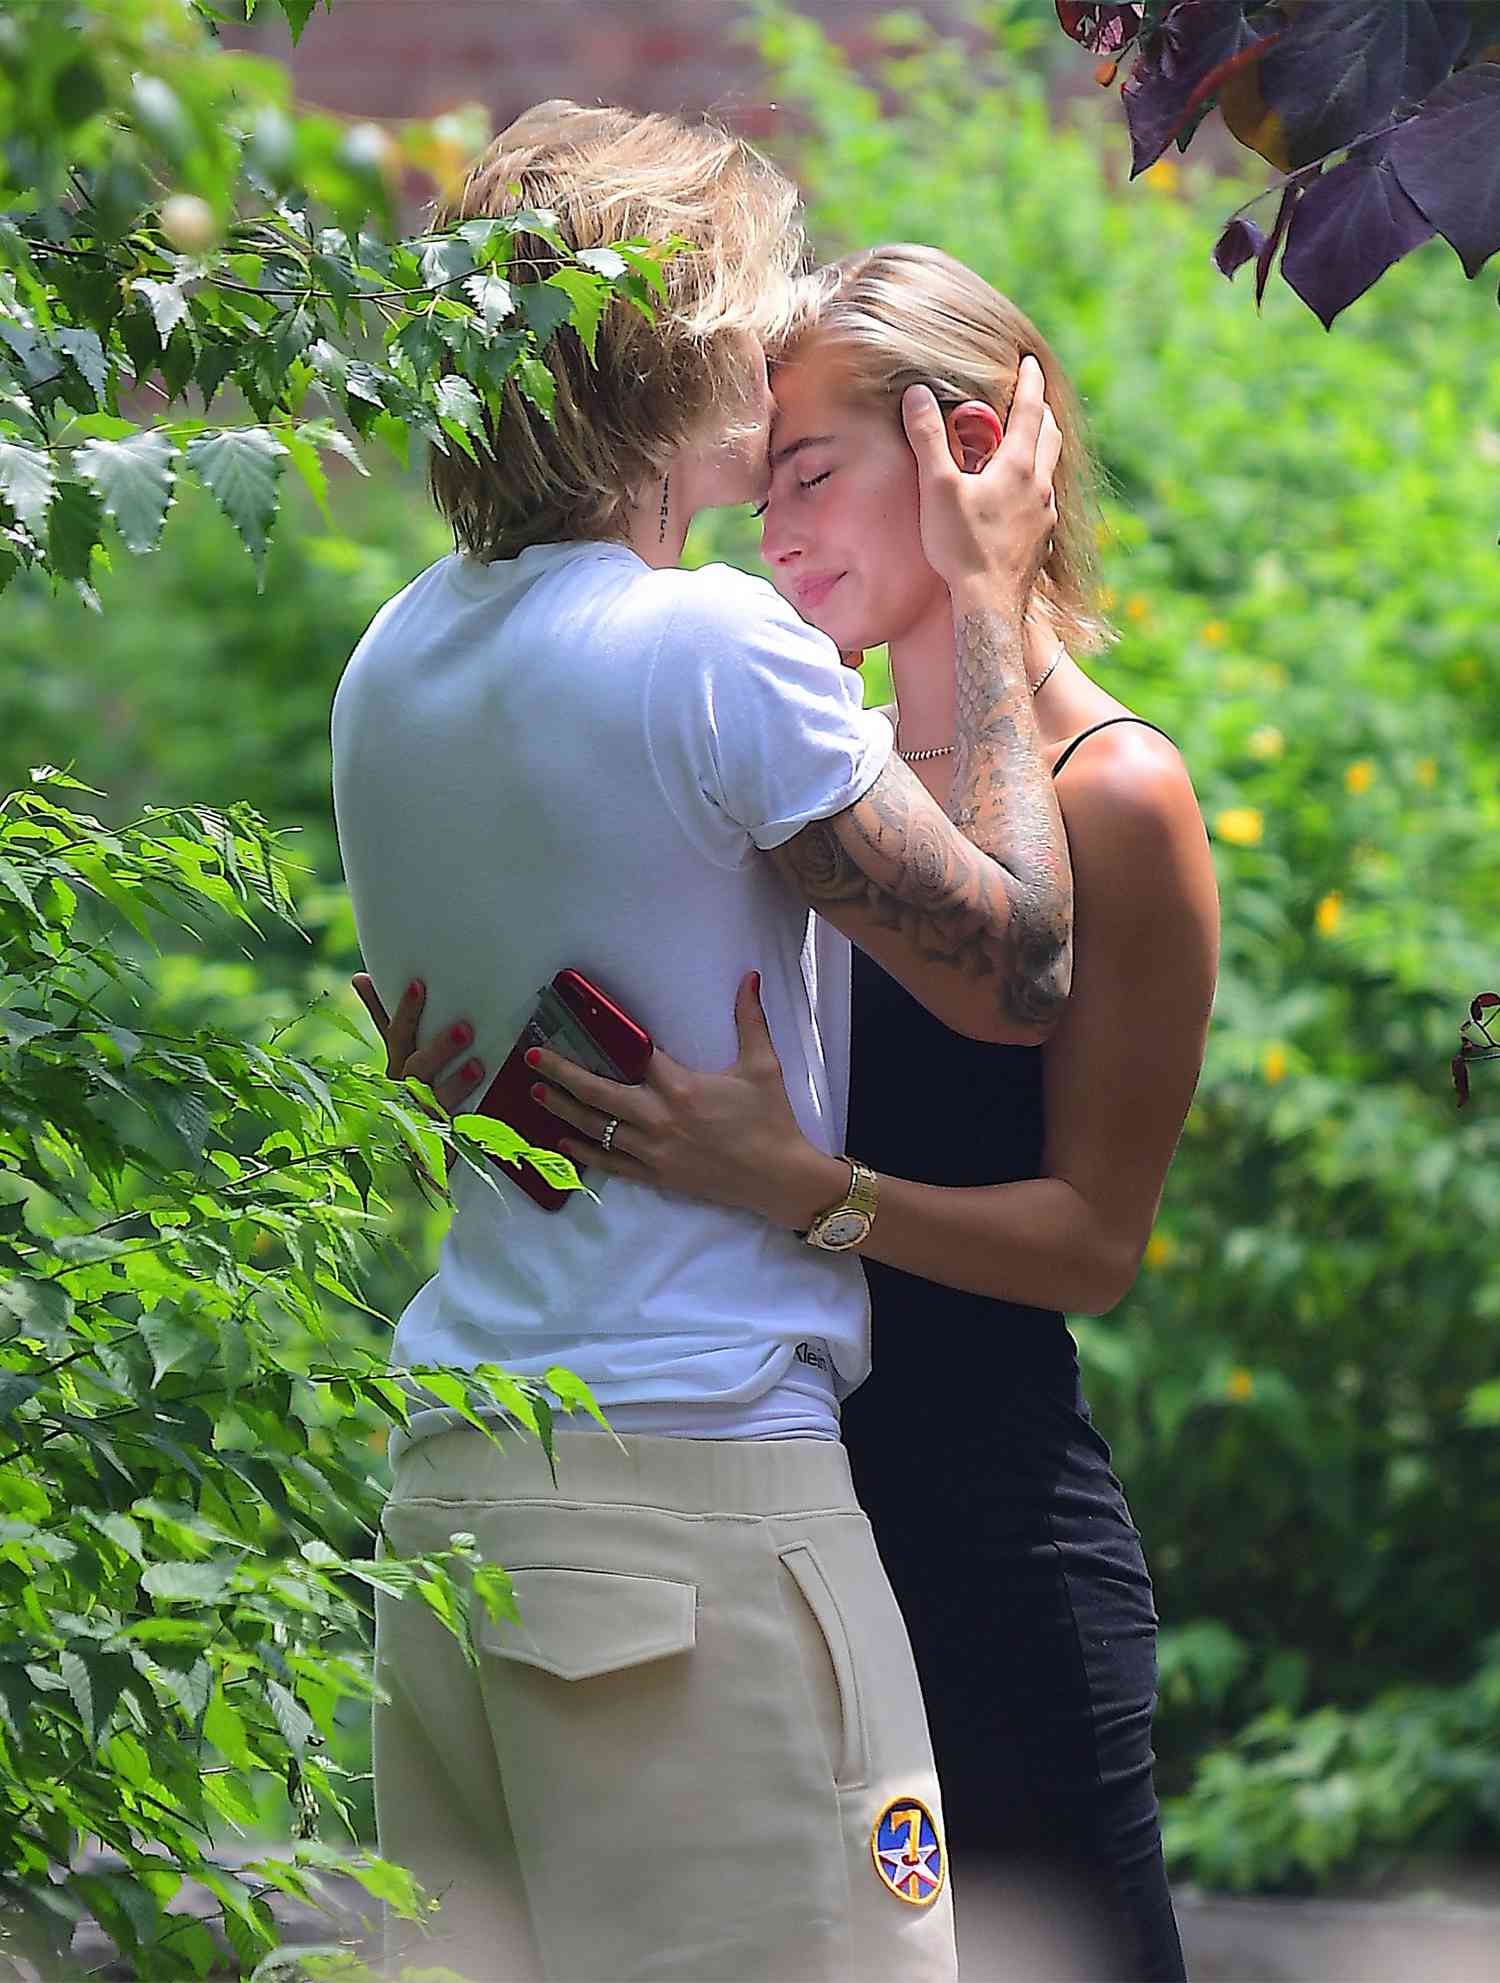 EXCLUSIVE: **PREMIUM EXCLUSIVE RATES APPLY** Justin Bieber And Hailey Baldwin Have Passionate Makeout Session During Afternoon Out In Brooklyn New York